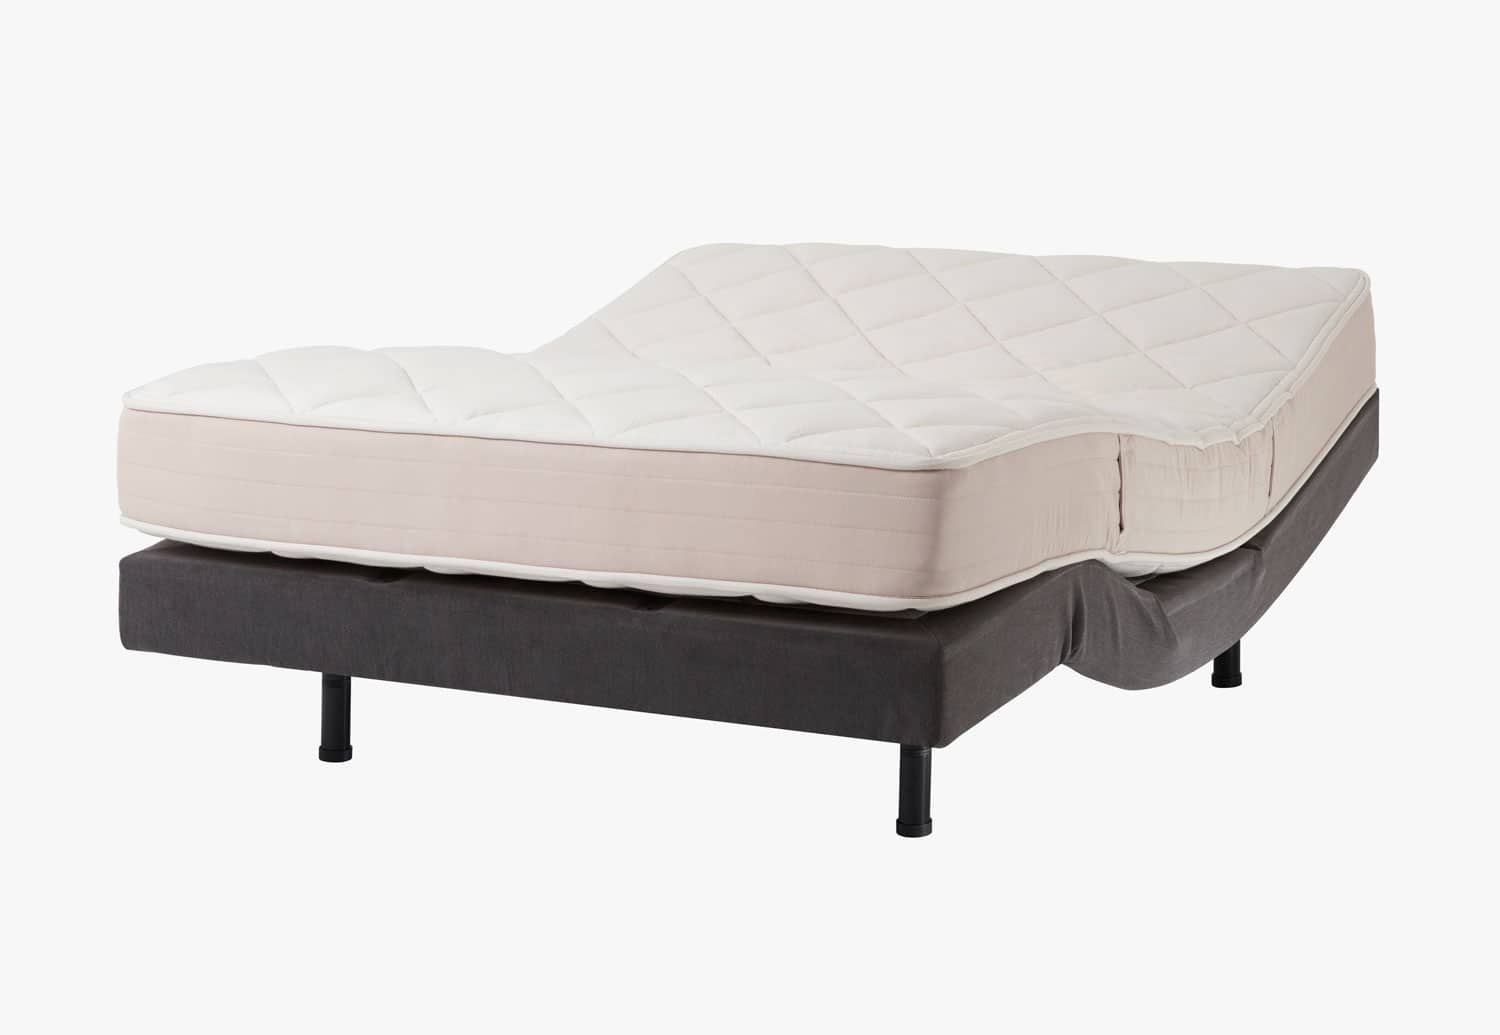 Custom Comfort A-300 – Premium Wireless Adjustable Bed with Massage A 300 FeatureOverviewImageFlipped